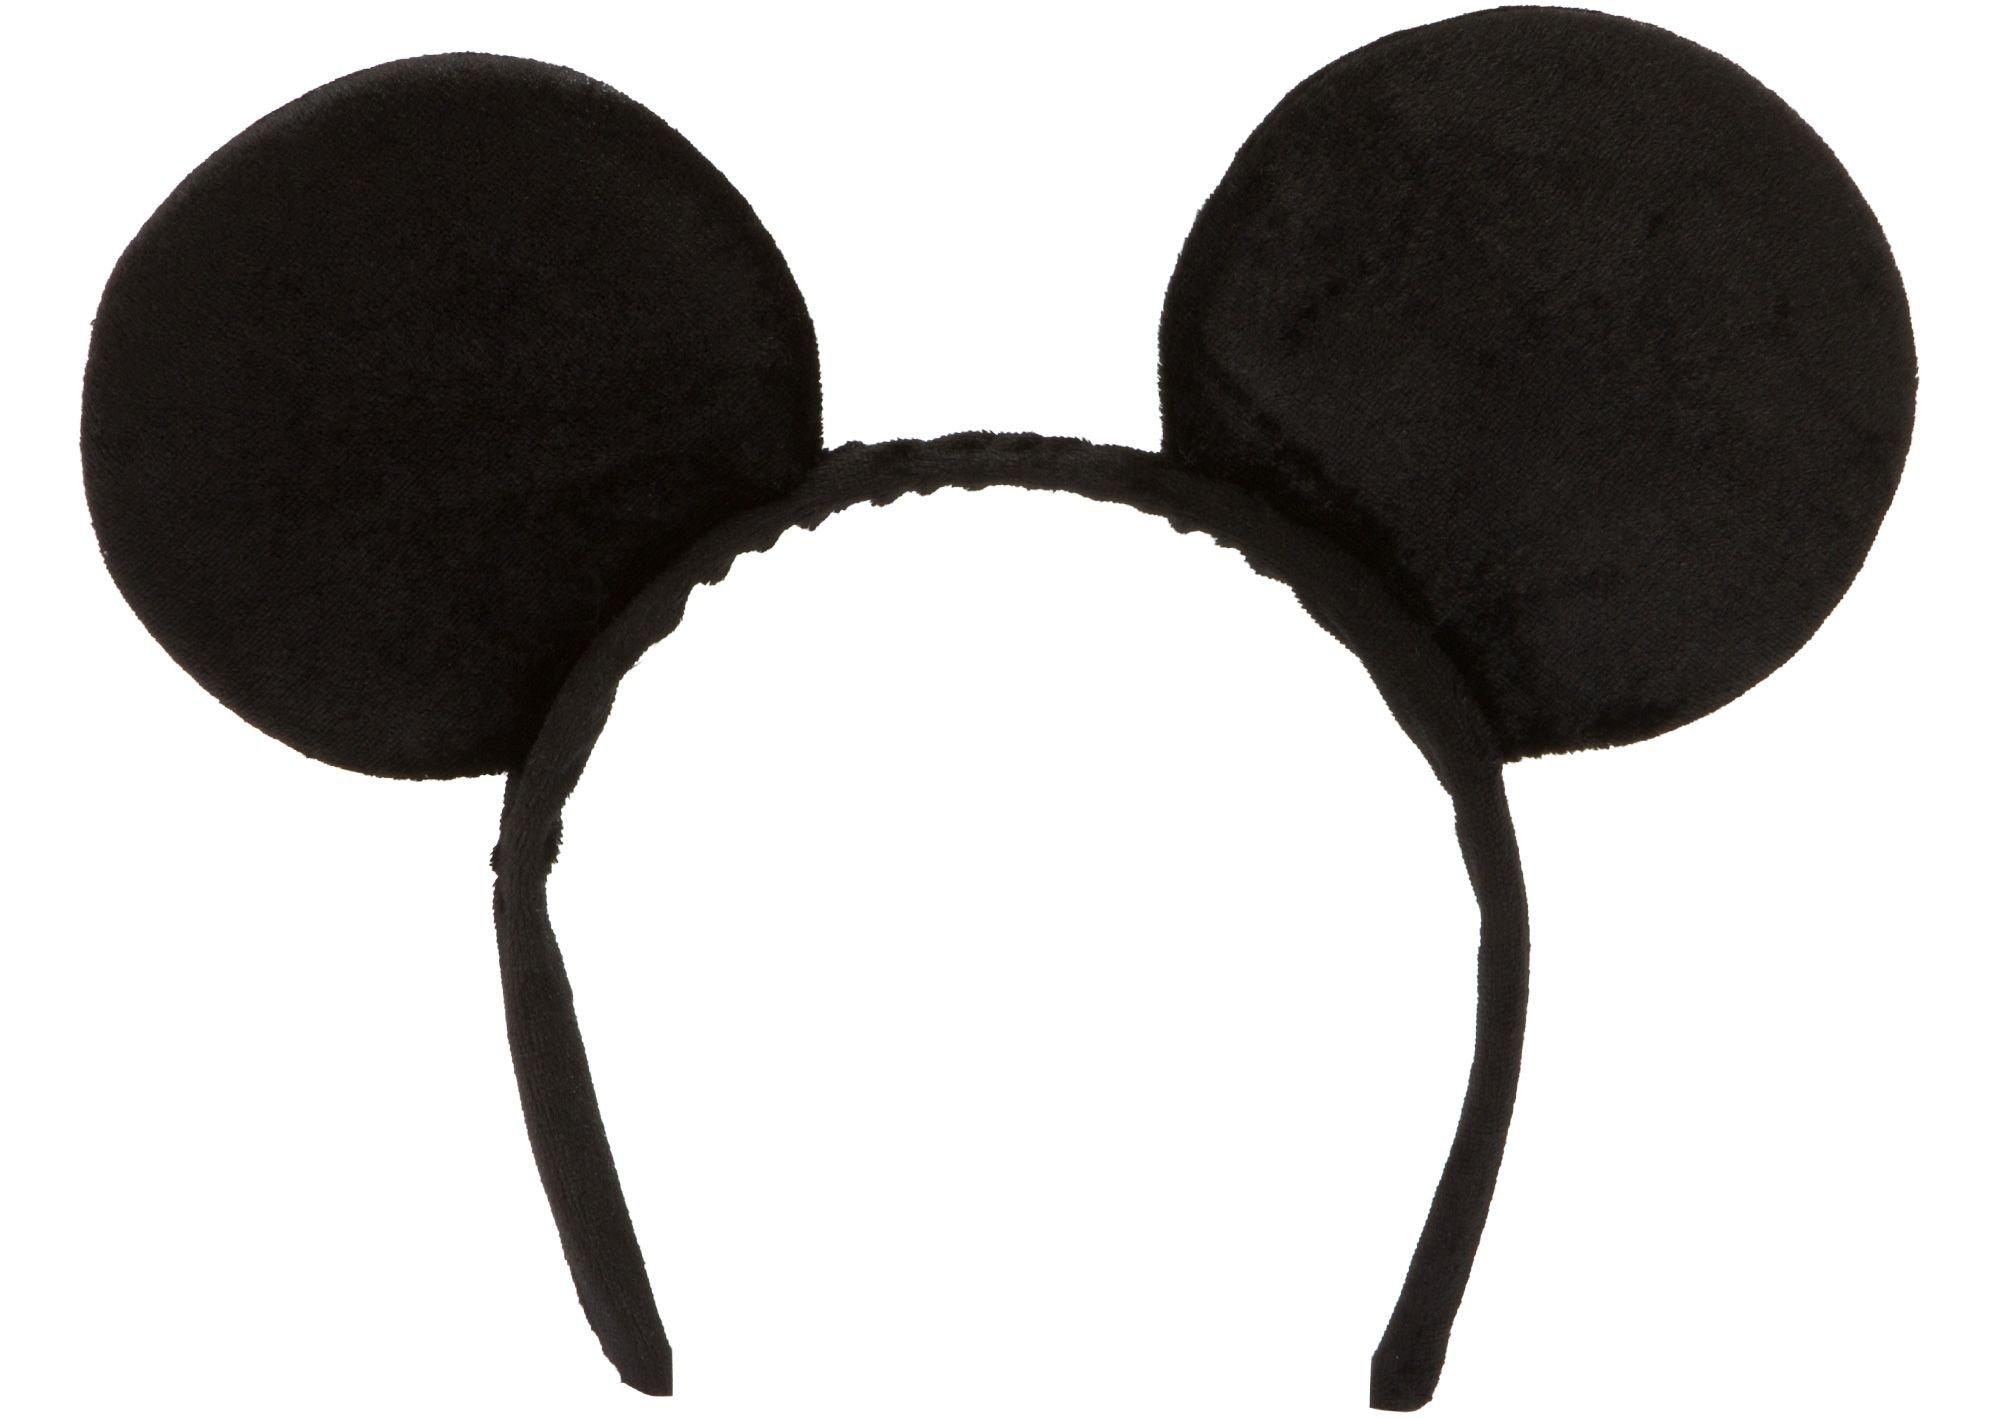 Our most popular Minnie Ears design. From gals trips to baby